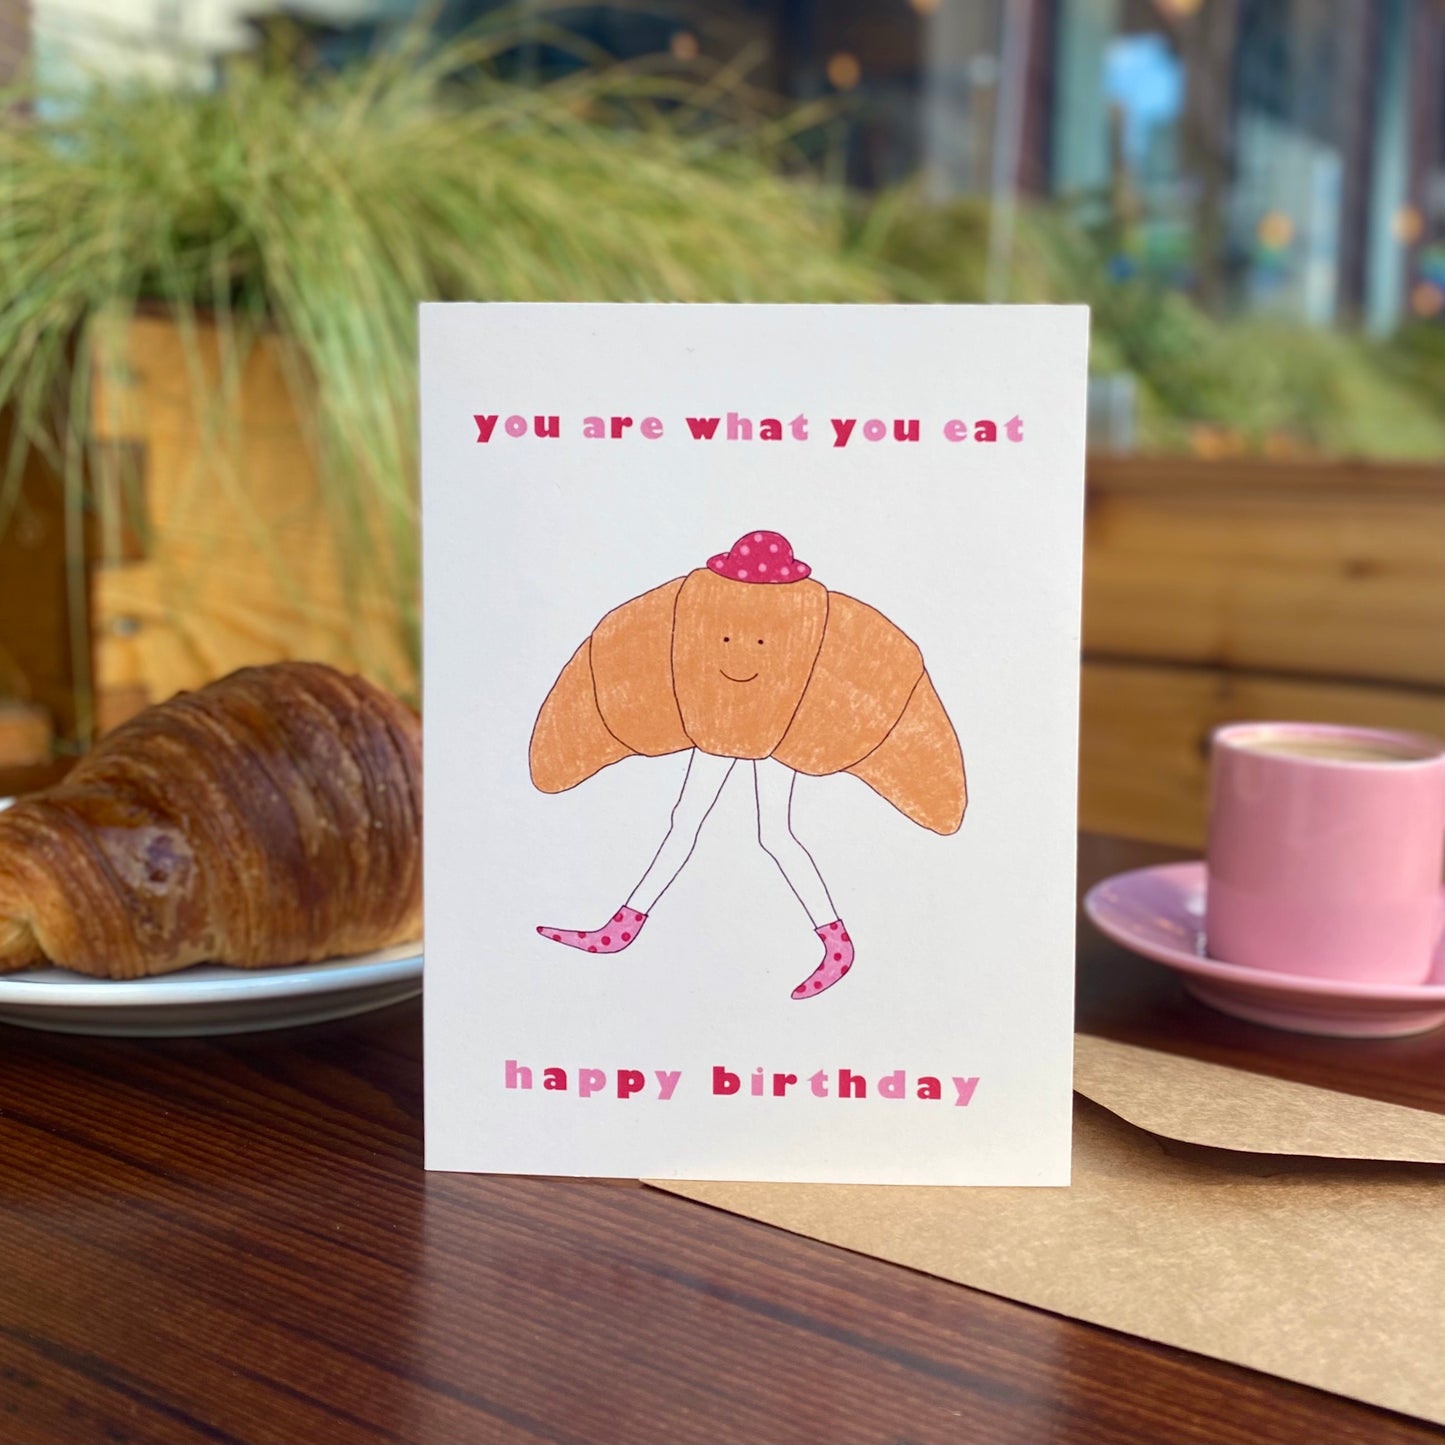 Silly and Cheeky Birthday Card with a cute croissant wearing pink socks and a red hat walking